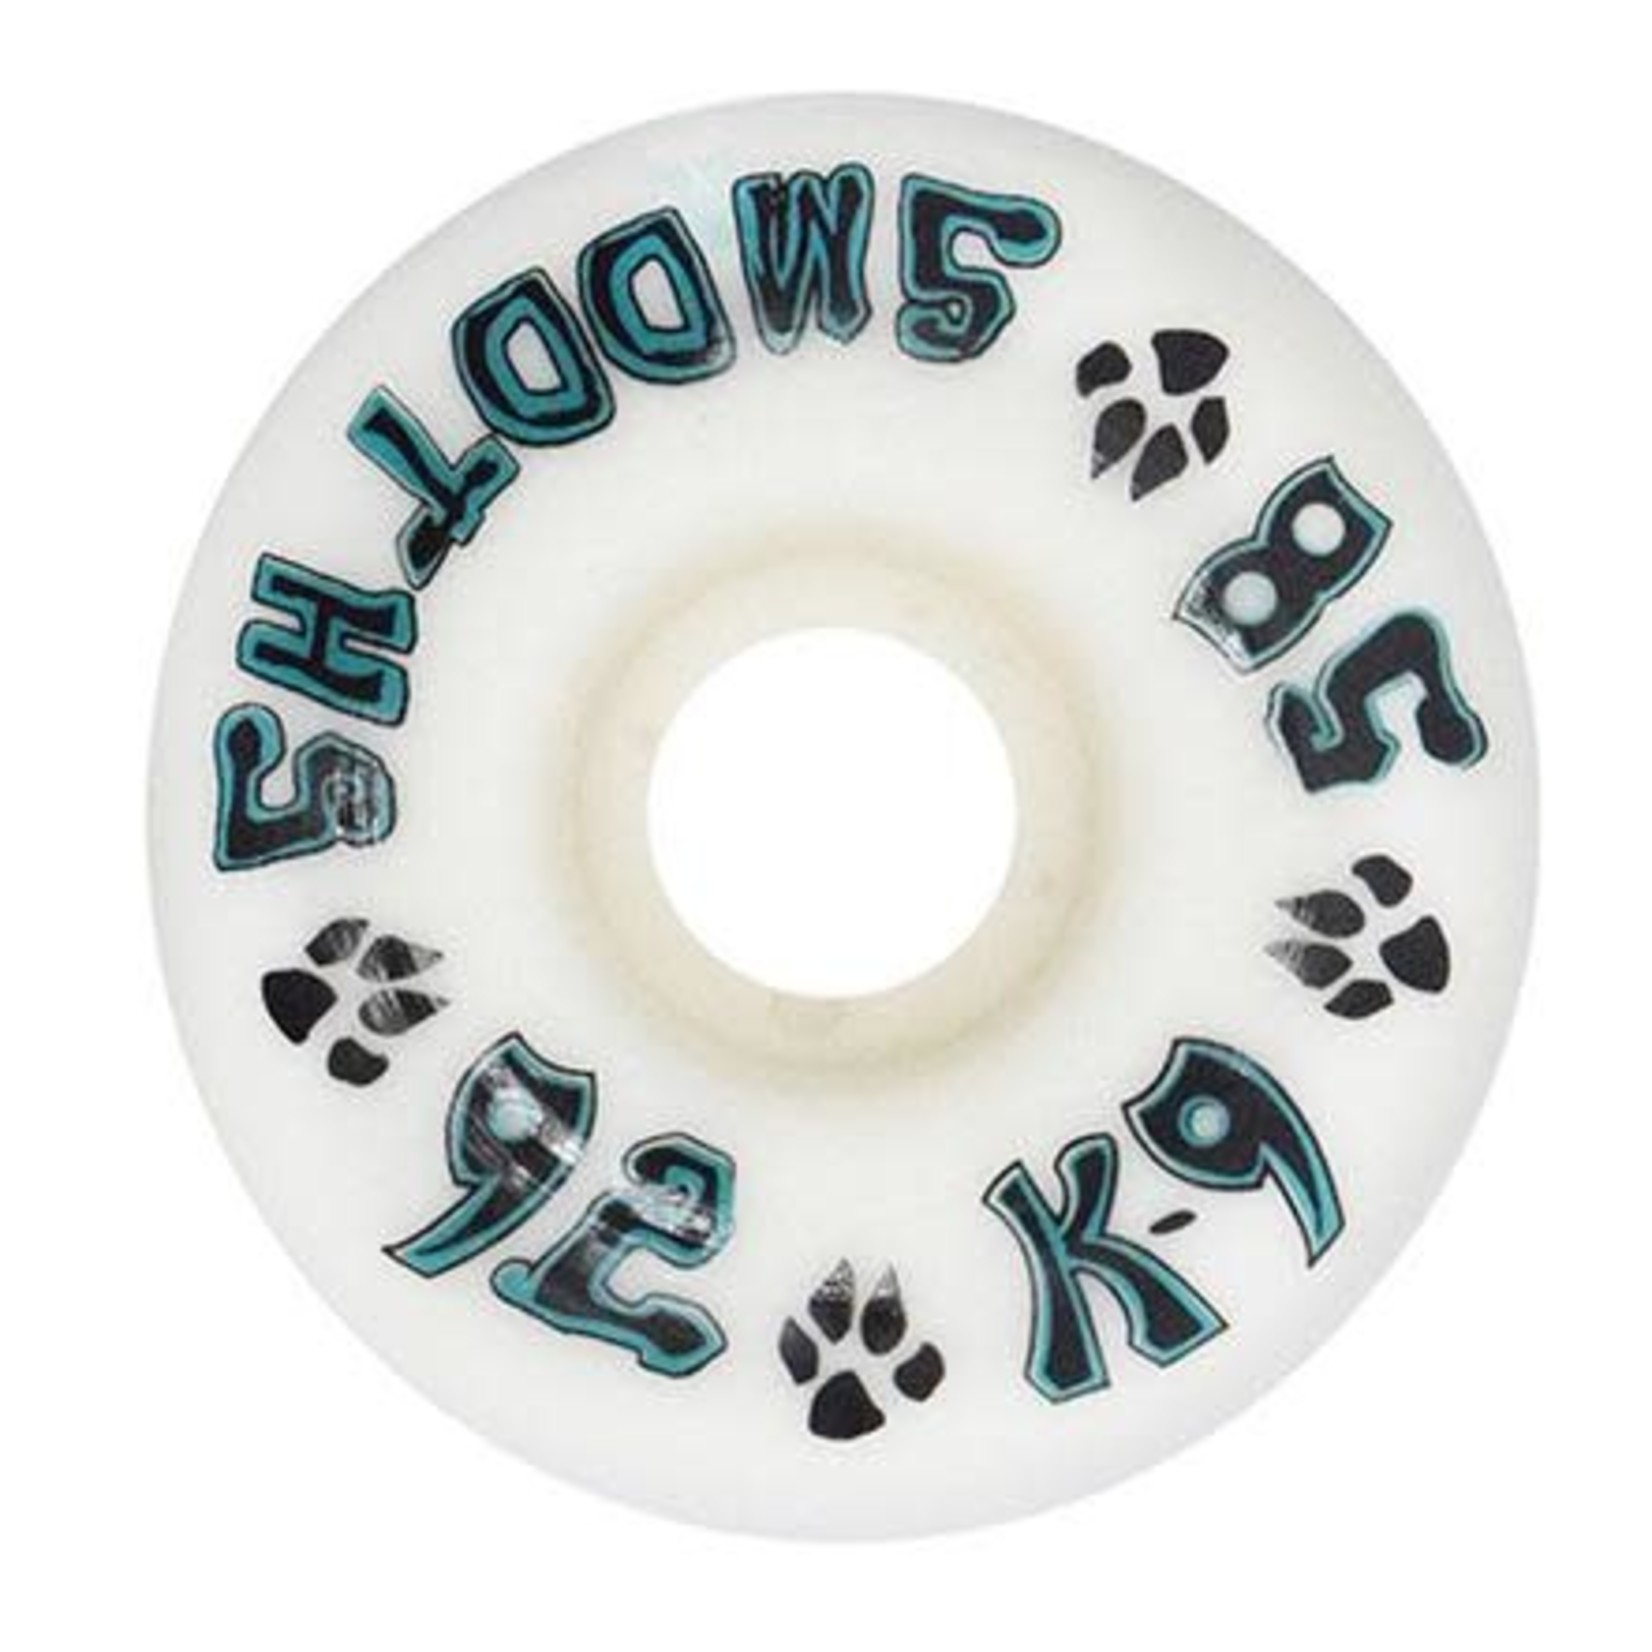 Dogtown 58mm 92a Dogtown K-9 Smooths Wheels (set of 4) - White